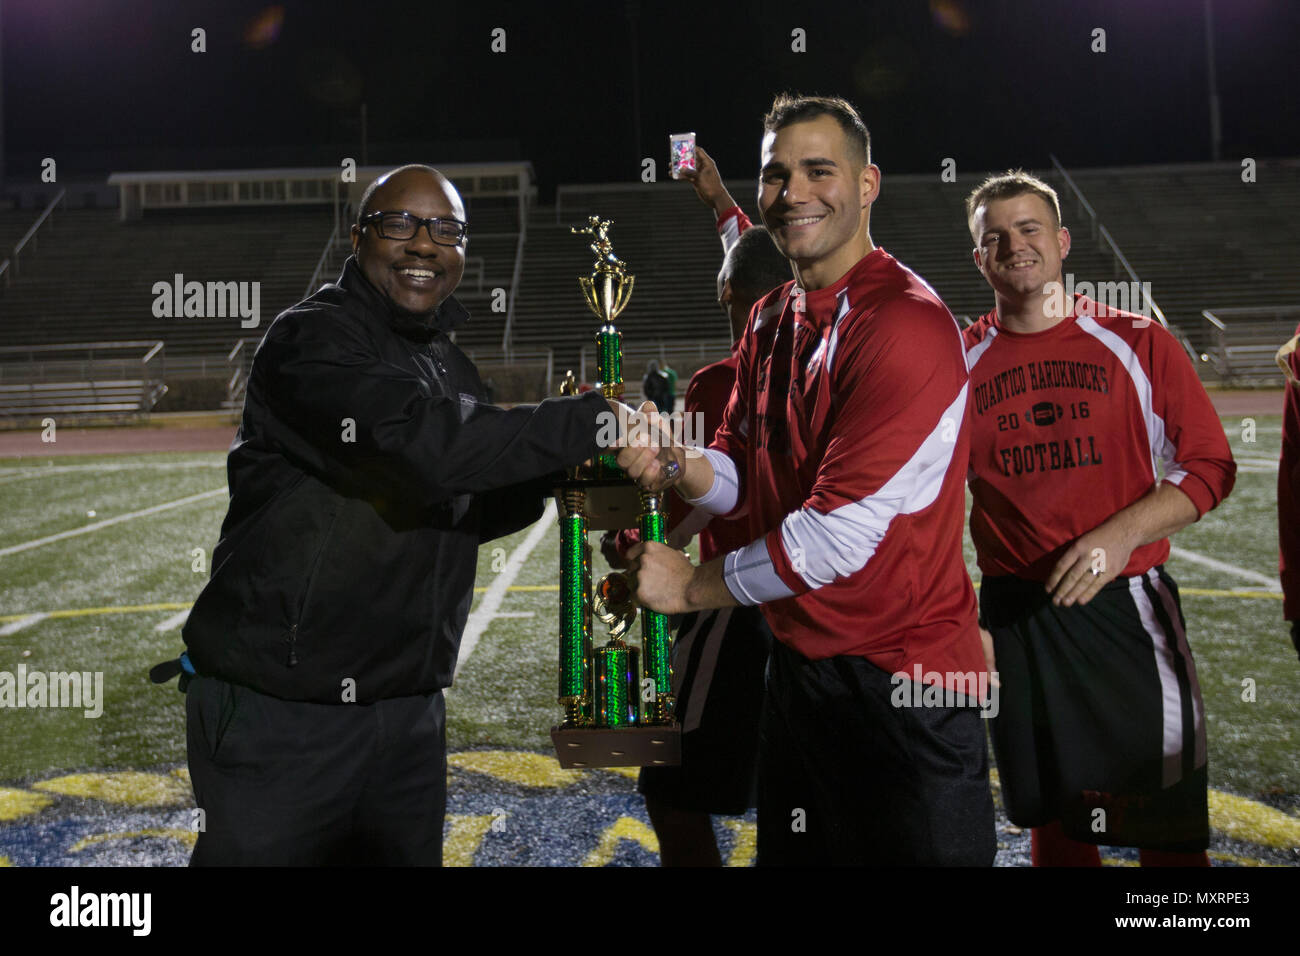 Joel Hines, left, director of the intramural sports program, Marine Corps Base Quantico (MCBQ), presents the first place trophy to the Base Motor Transport team during the Marine Corps Community Services Intramural Flag Football Championship Tournament at Butler Stadium, MCBQ, Va., Dec. 1, 2016. Marines from different units volunteer to compete in an intermural flag football league. (U.S. Marine Corps photo by Lance Cpl. Cristian L. Ricardo) Stock Photo